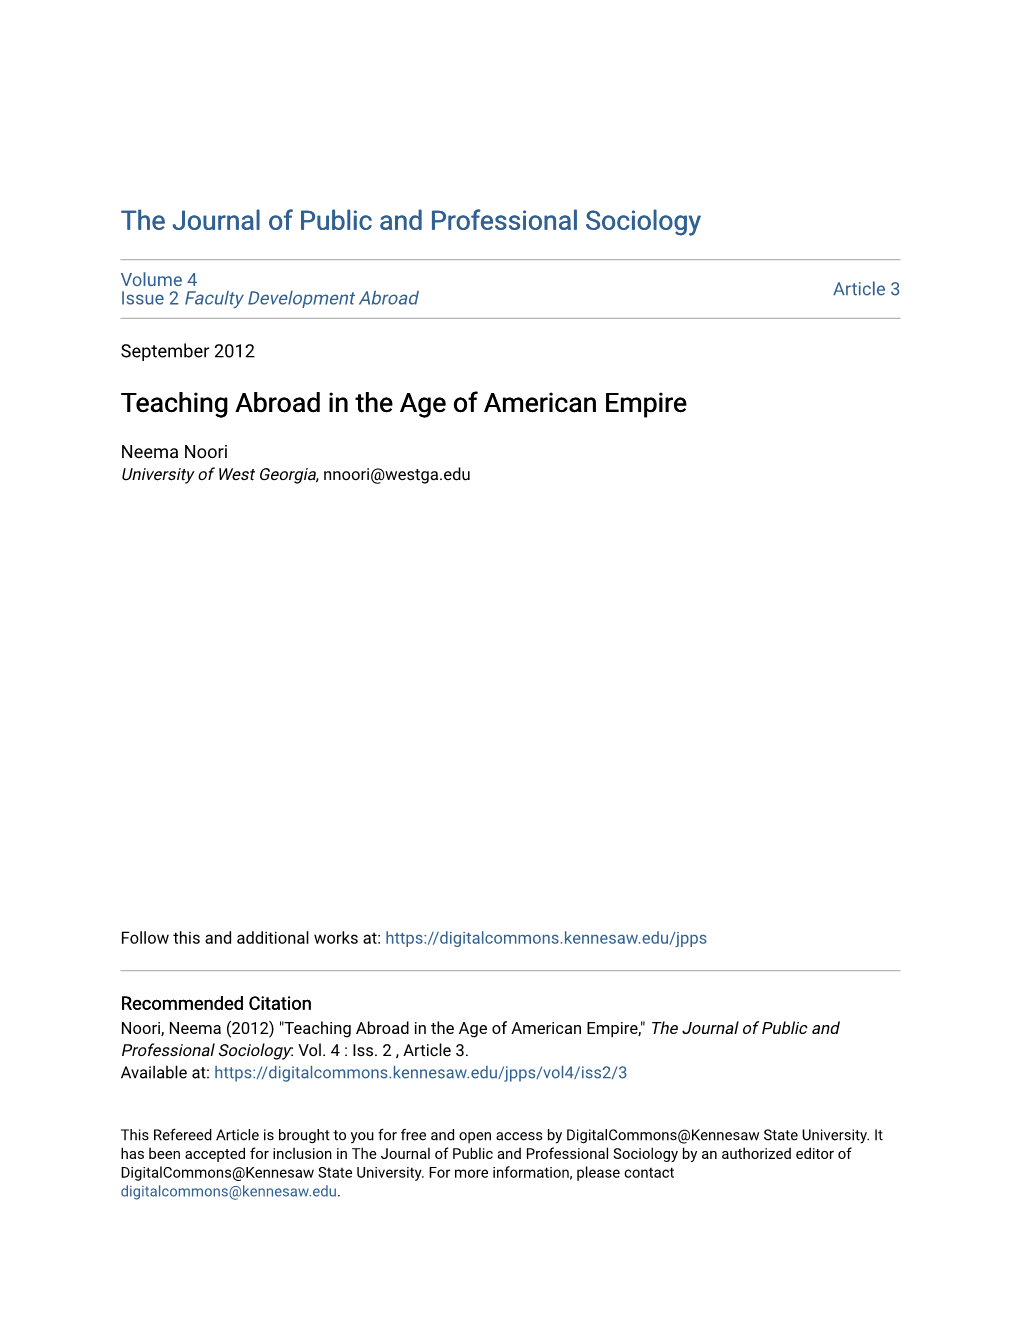 Teaching Abroad in the Age of American Empire